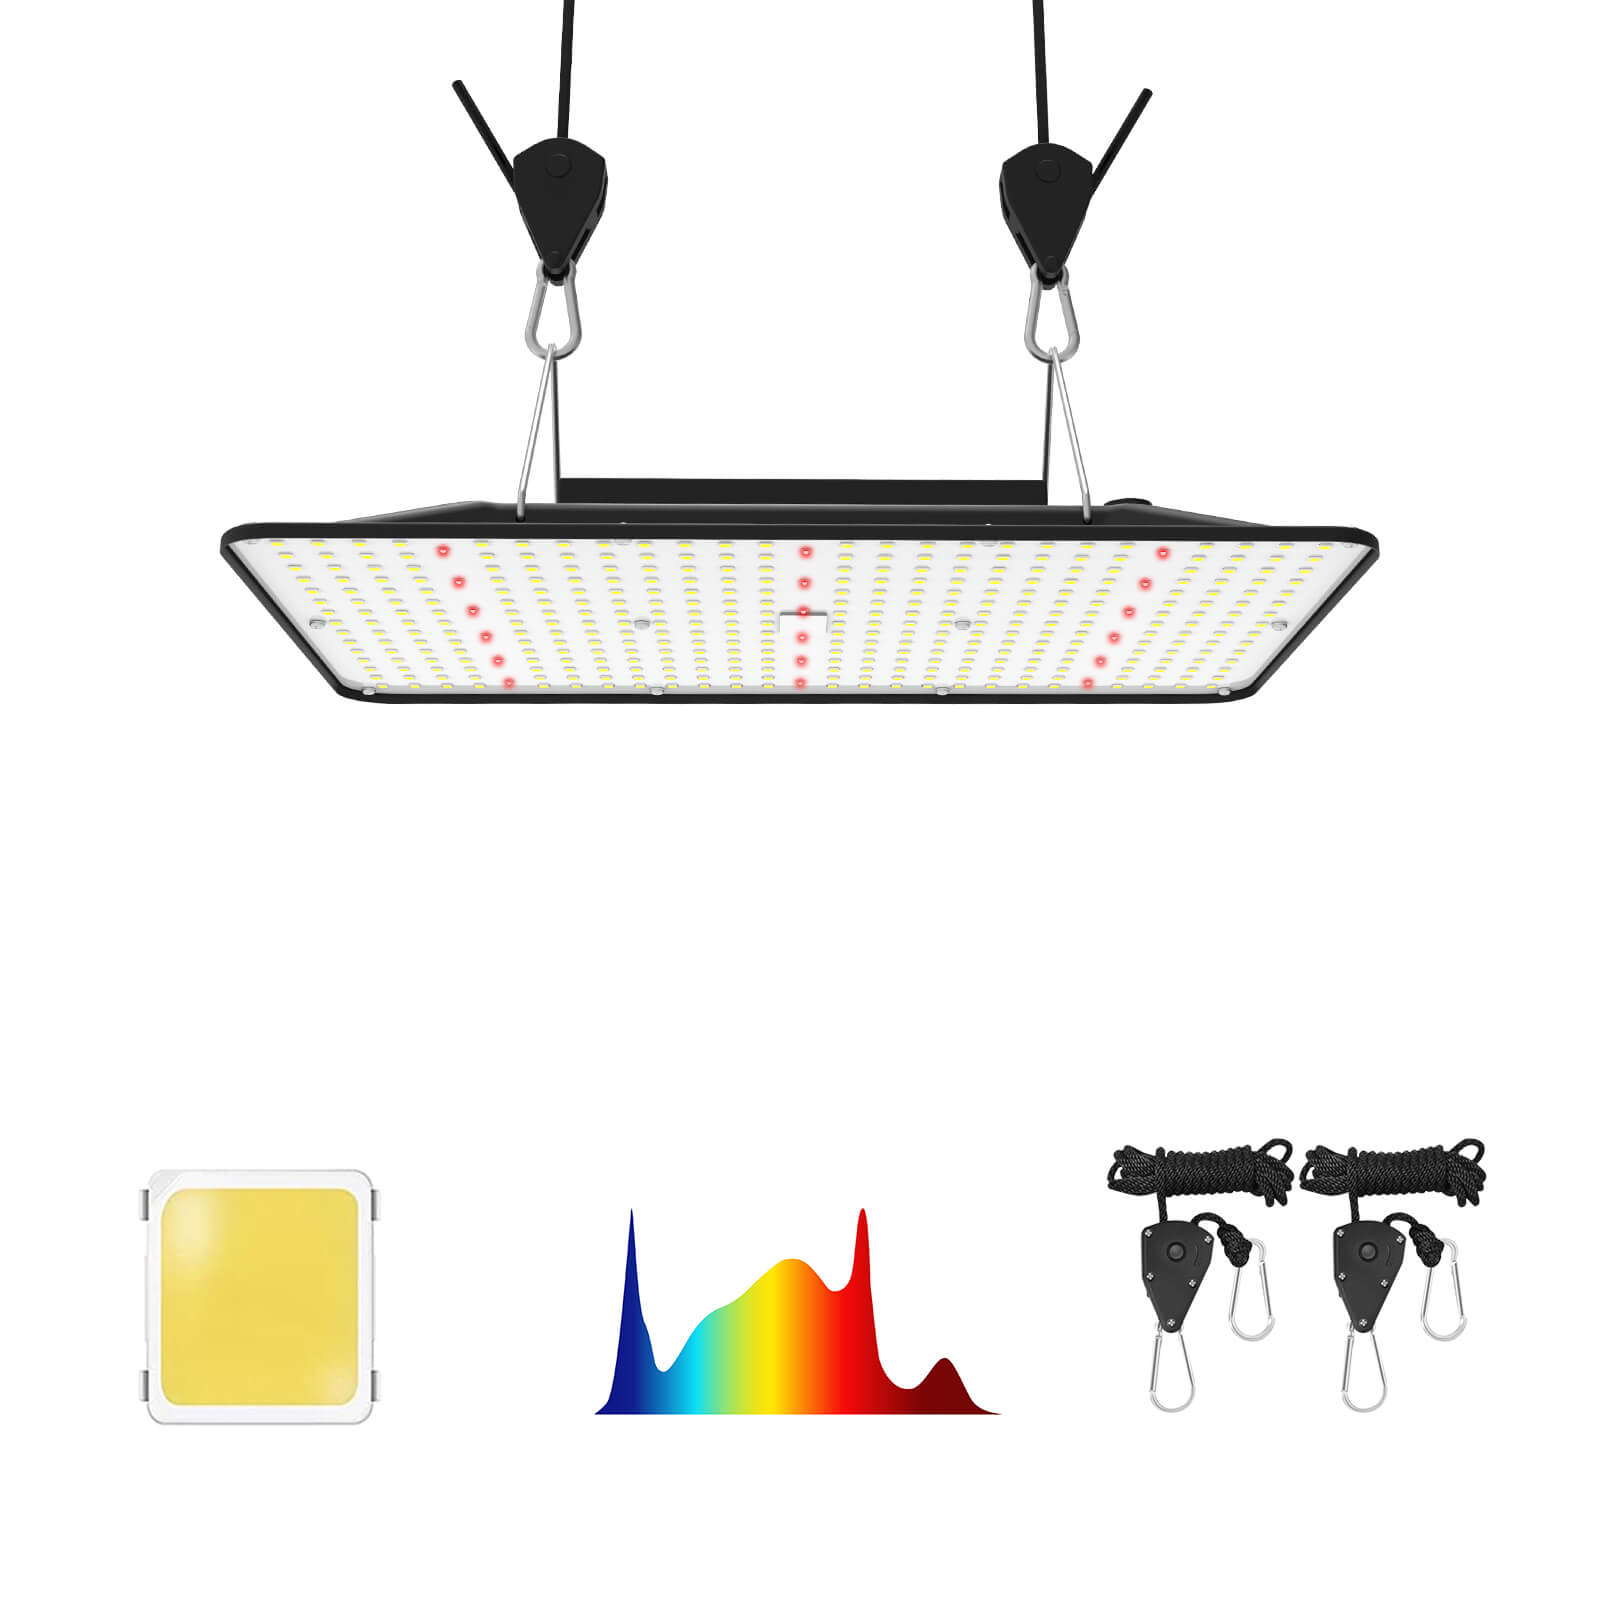 CT-100 Full Spectrum LED Grow Light - 100 Watts, 2x2 (4 sq ft), Small Fixture, Dimmable Knob, IR Diodes | Cultiuana